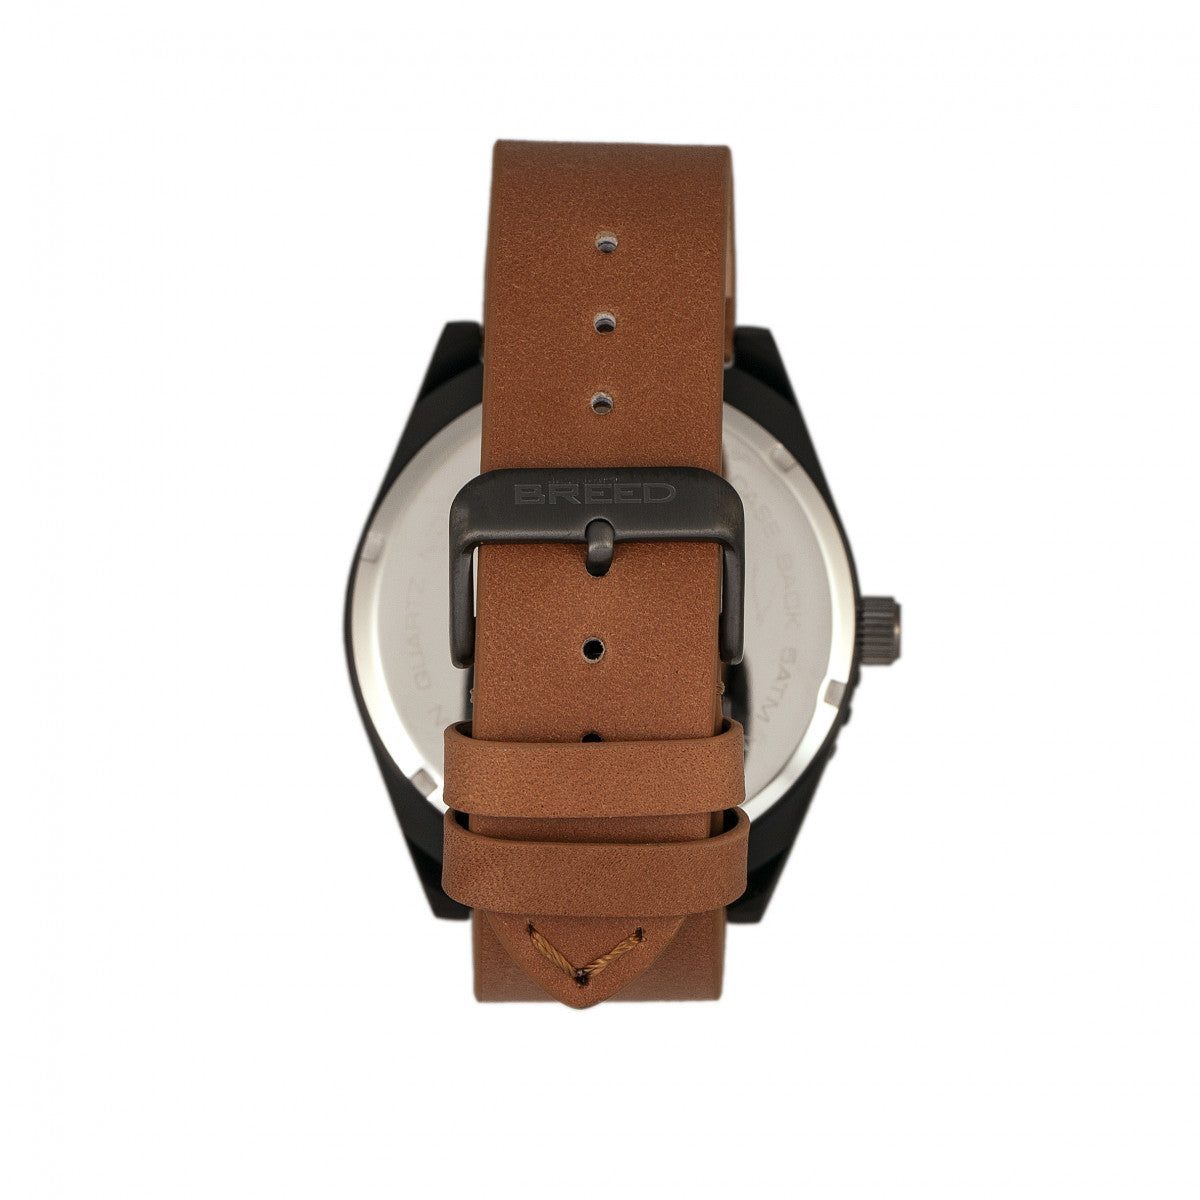 Breed Ranger Leather-Band Watch w/Date - Black/Brown - BRD8006